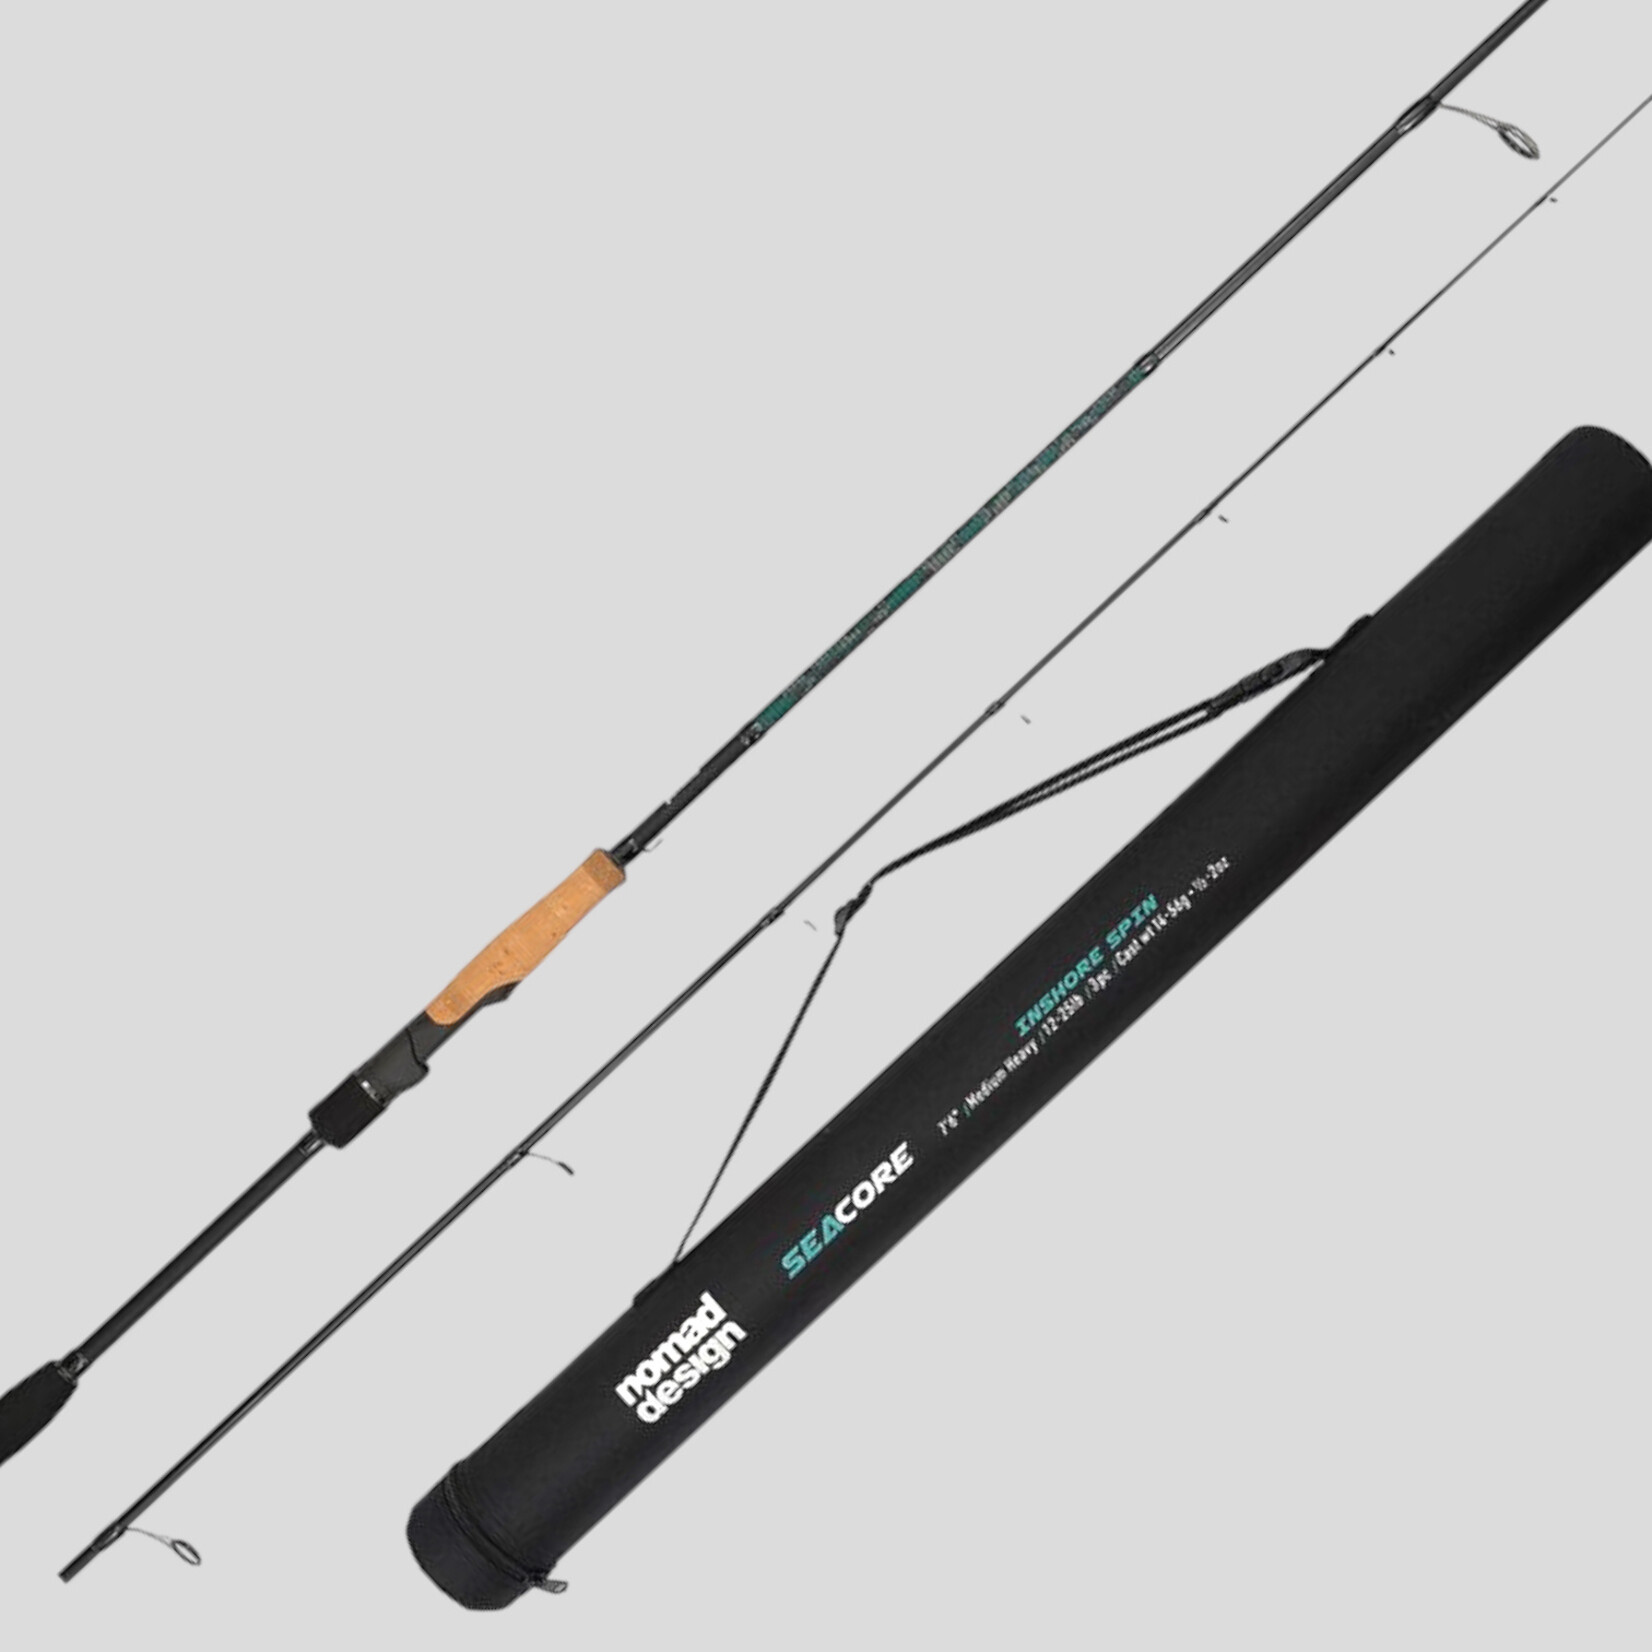 Nomad Nomad Seacore Inshore Travel Spin Rod